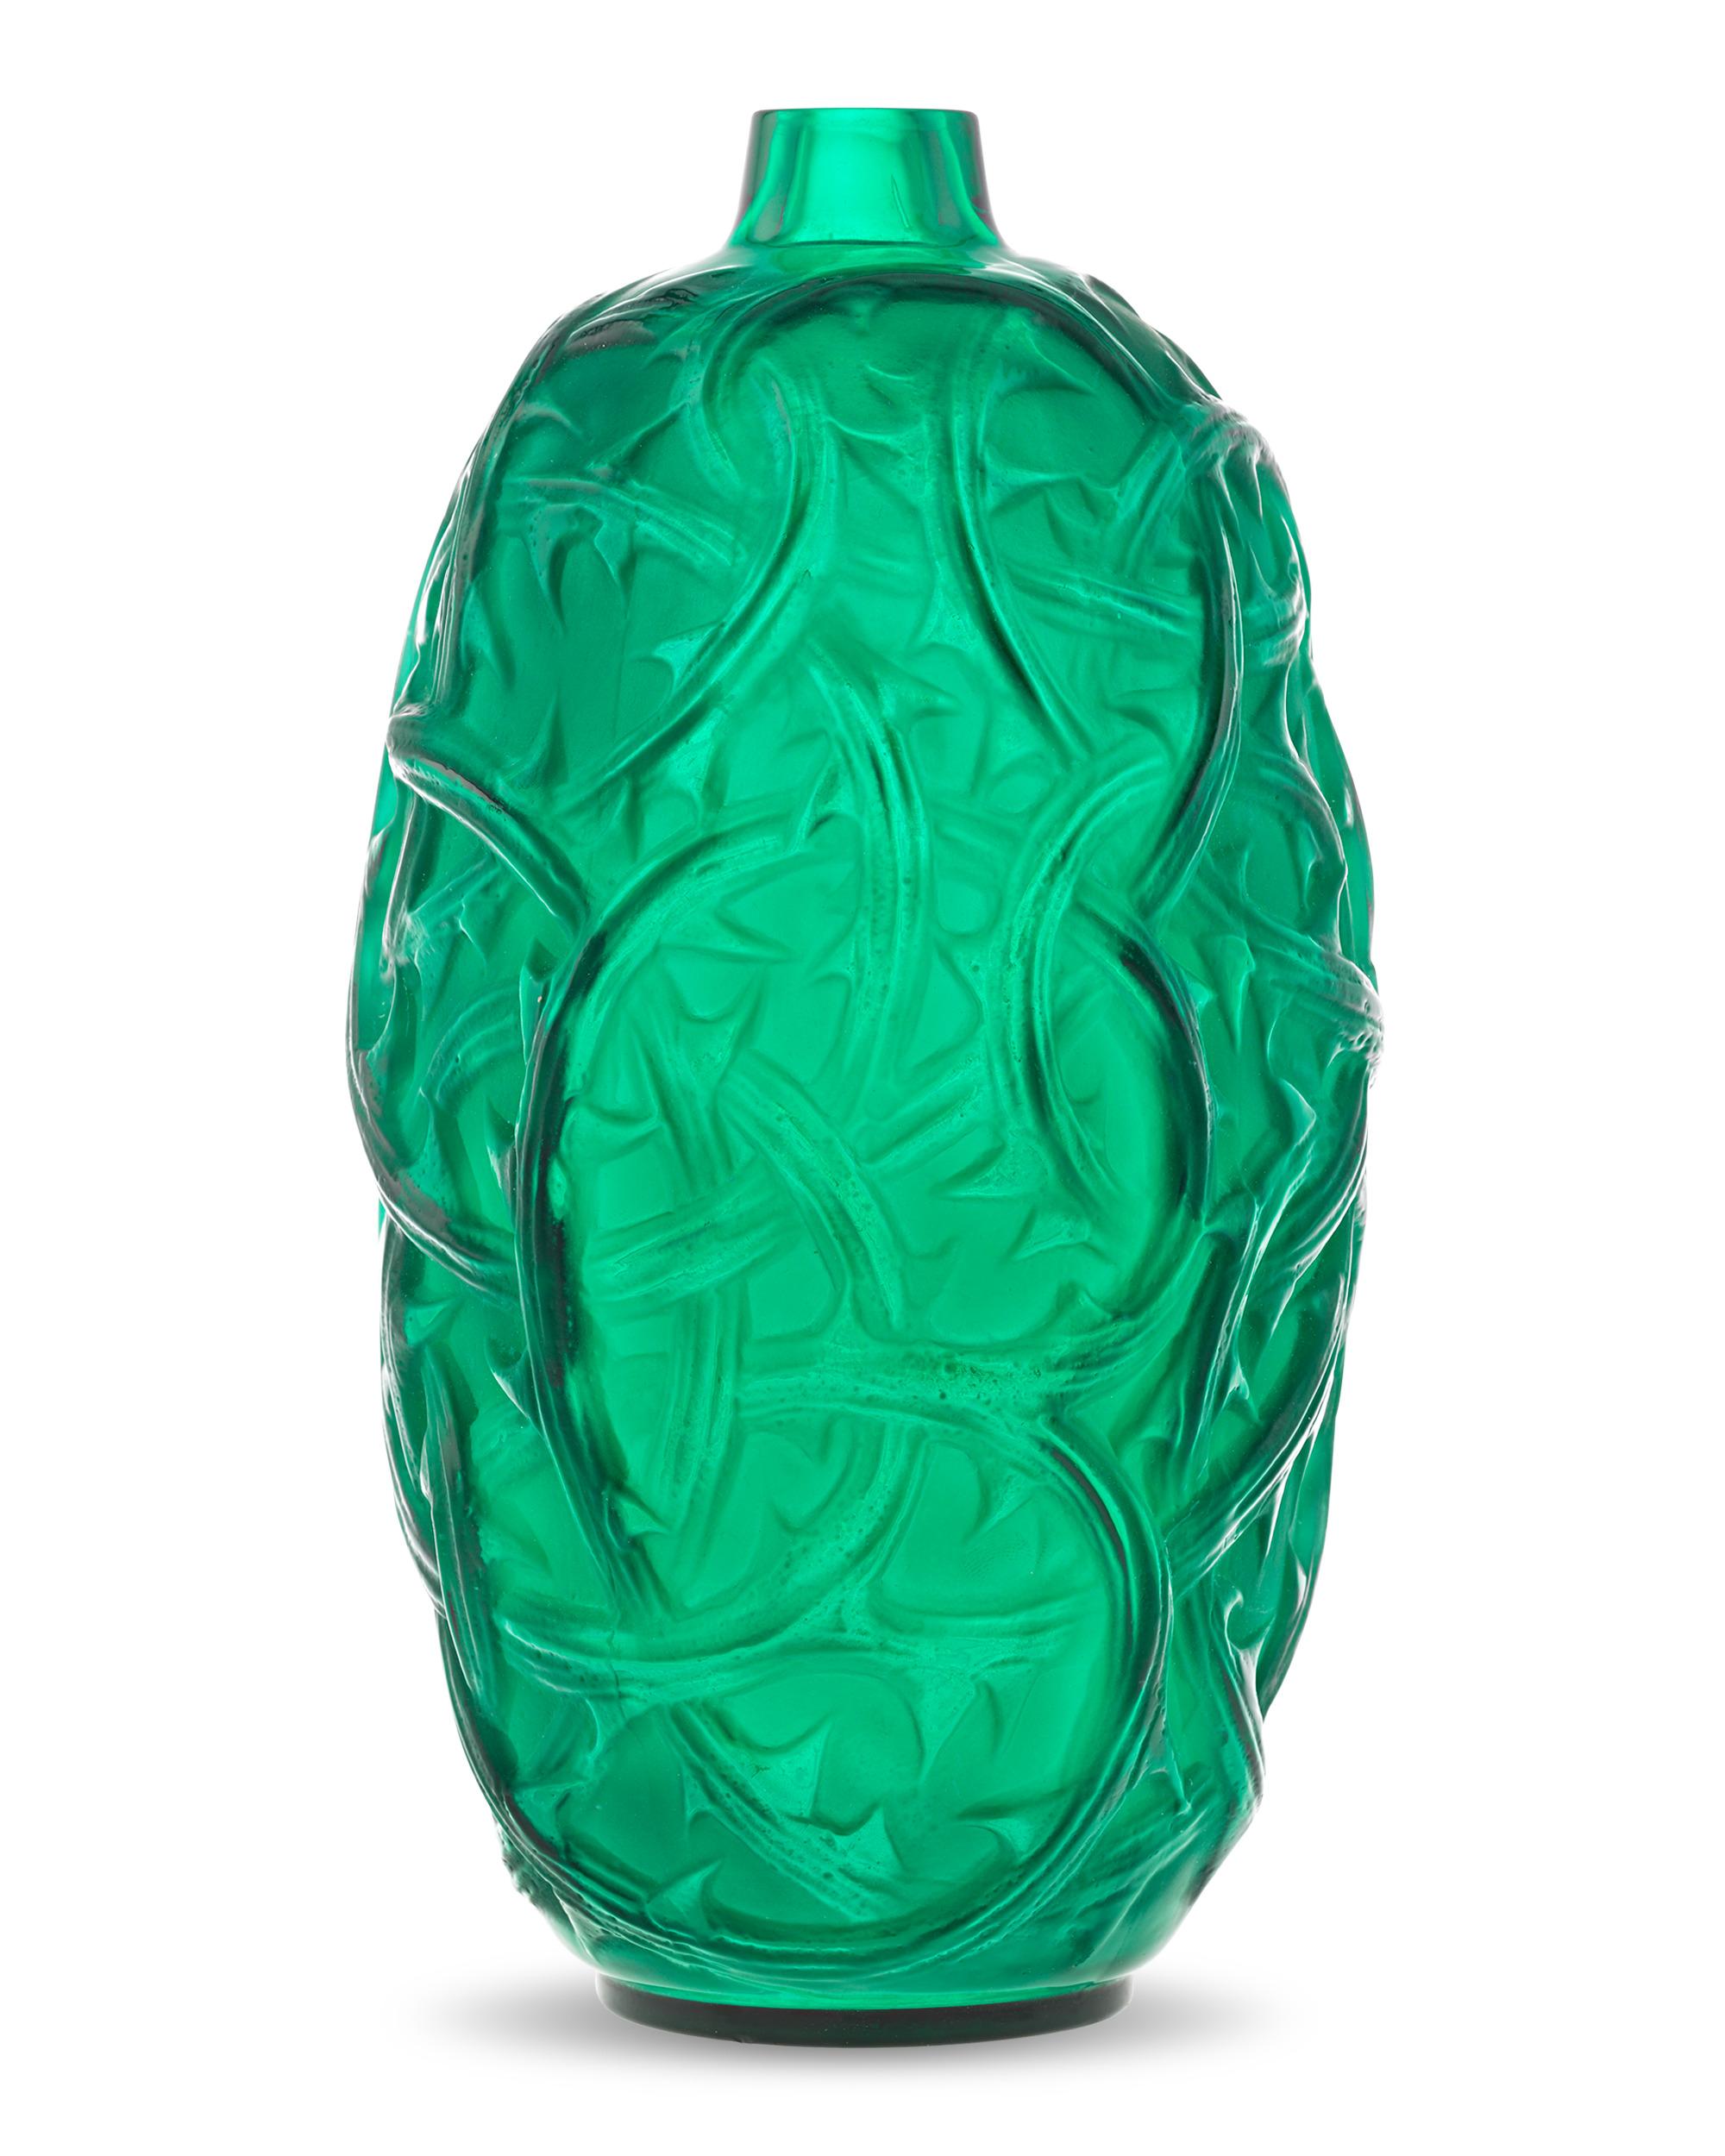 Designed by René Lalique in 1921, this Ronces pattern vase features a bold array of winding blackberry vines. The vessel highlights the master's love of the striking forms and natural motifs that typified his output. Composed of frosted green glass,